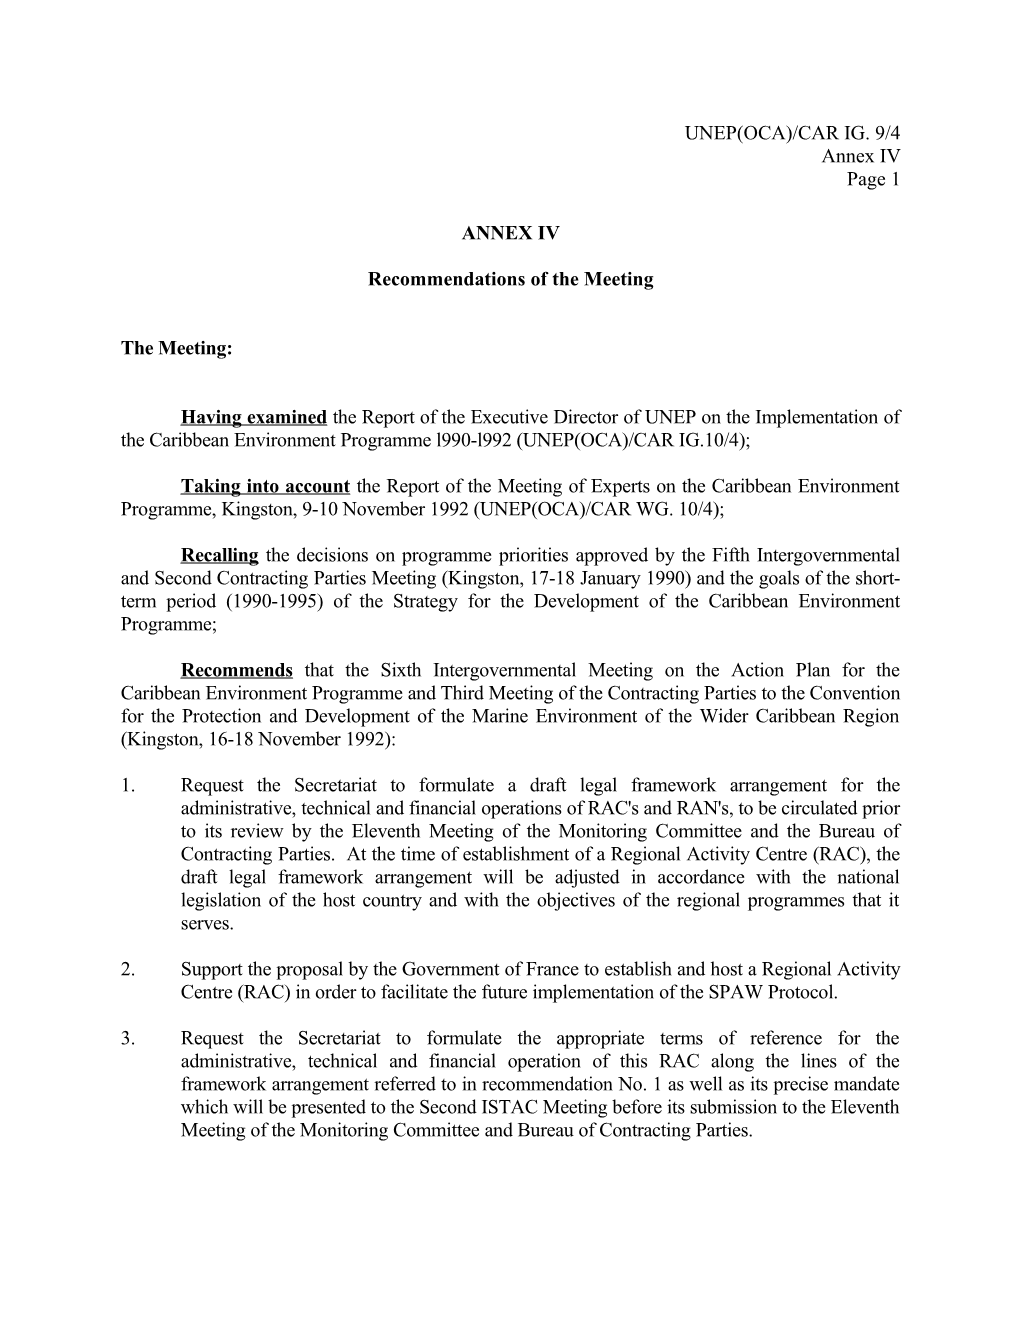 Recommendations of the Meeting